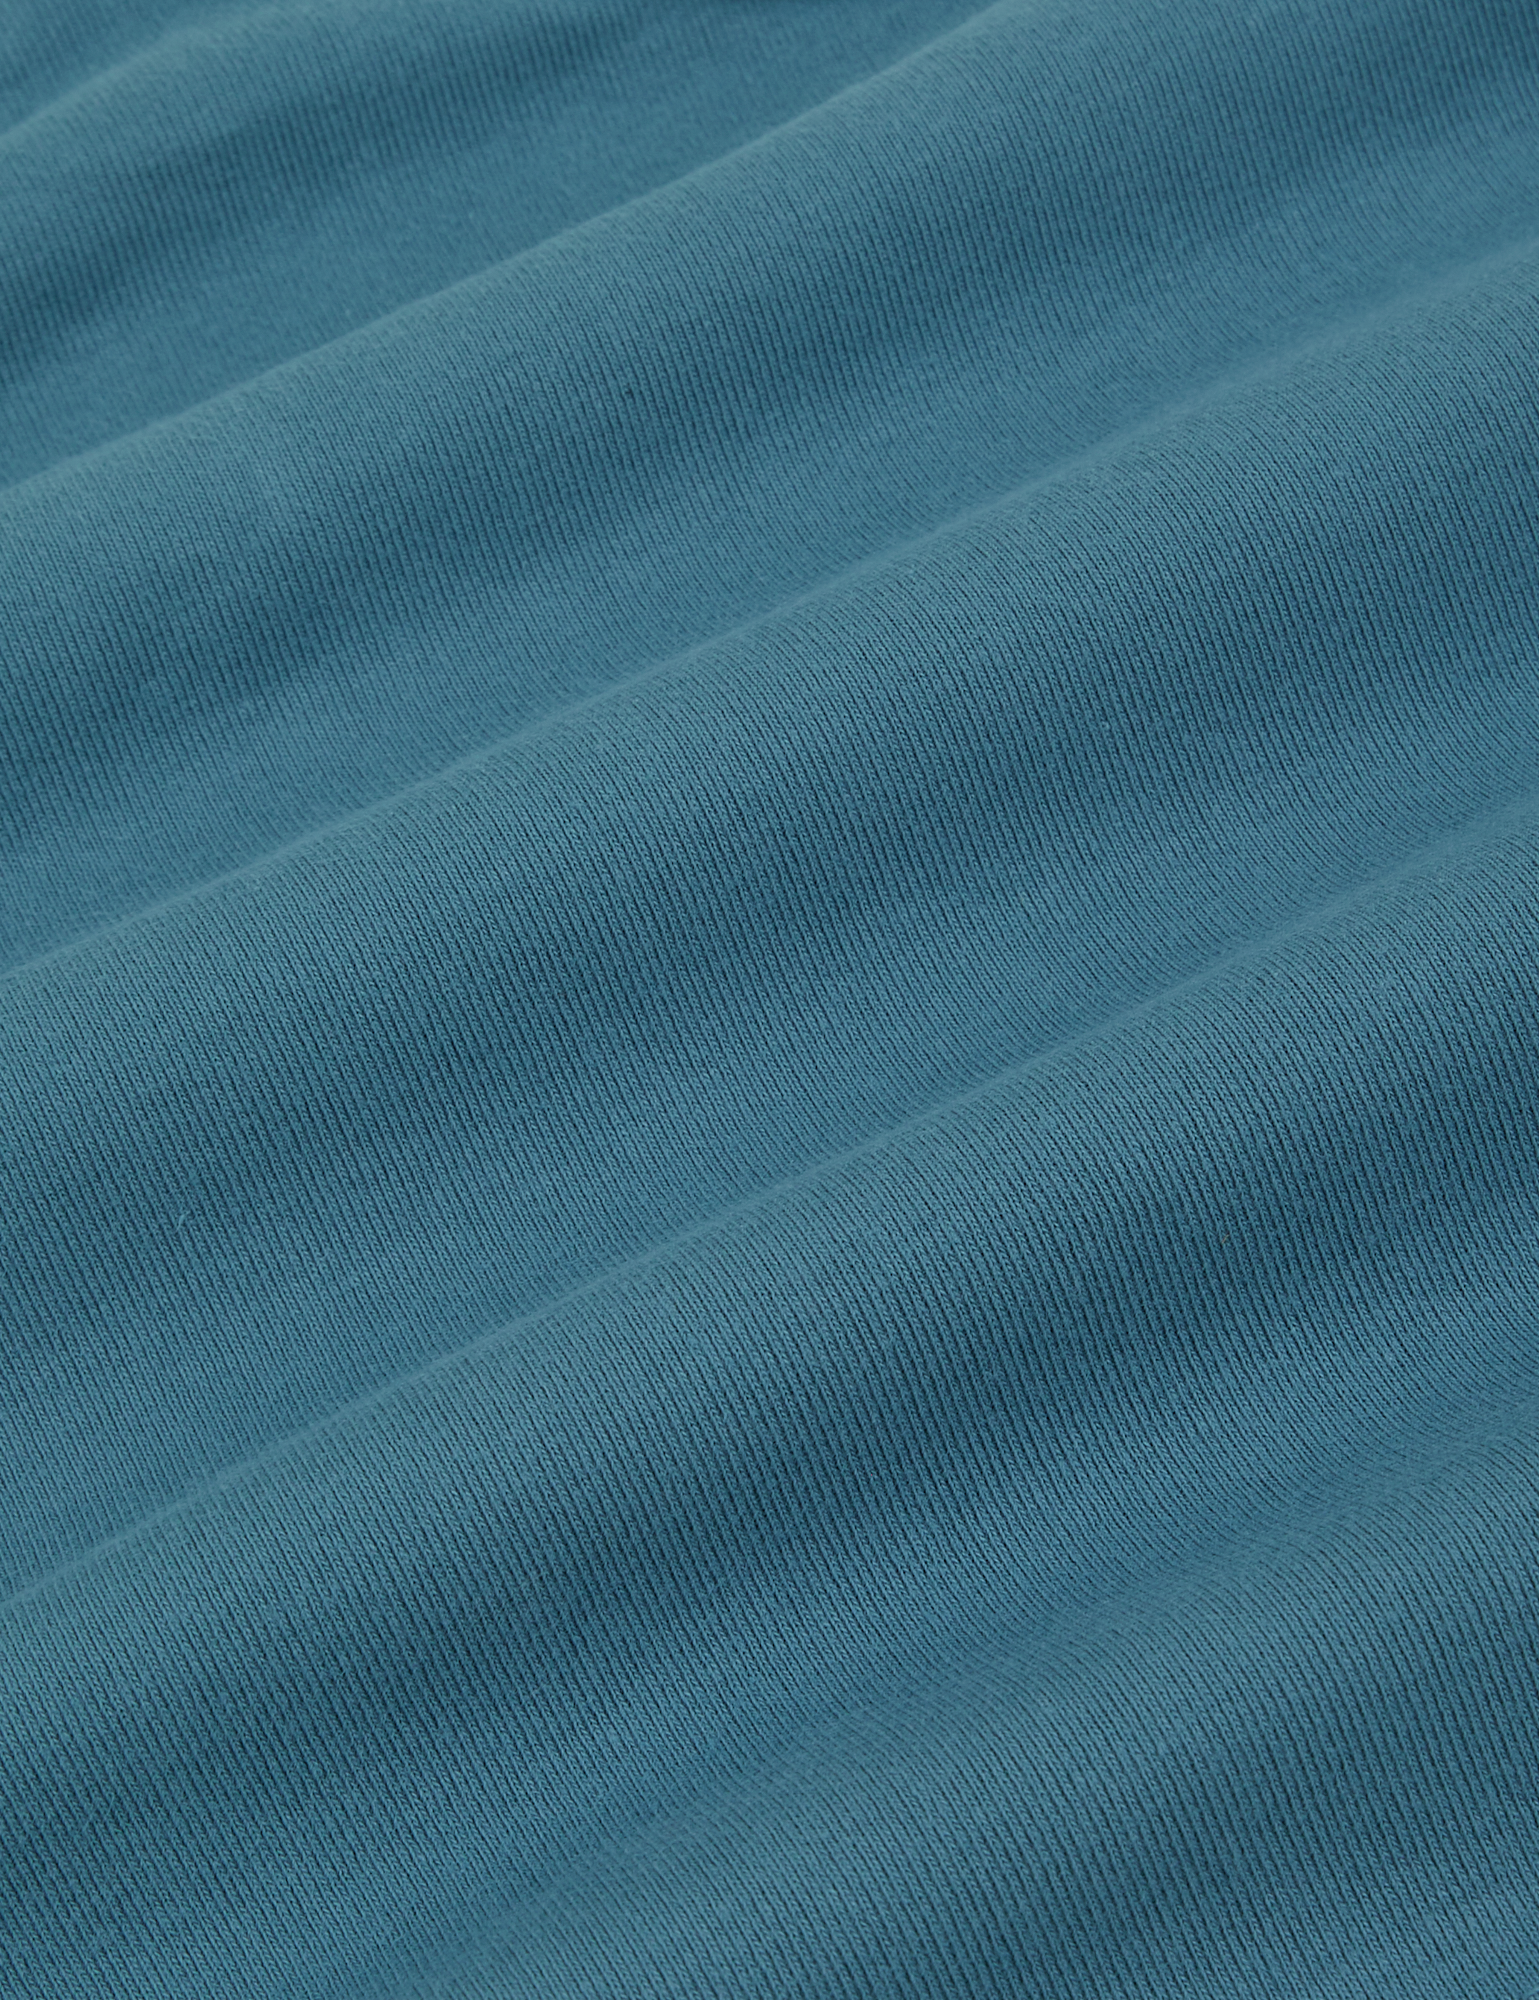 Halter Top in Marine Blue fabric detail close up